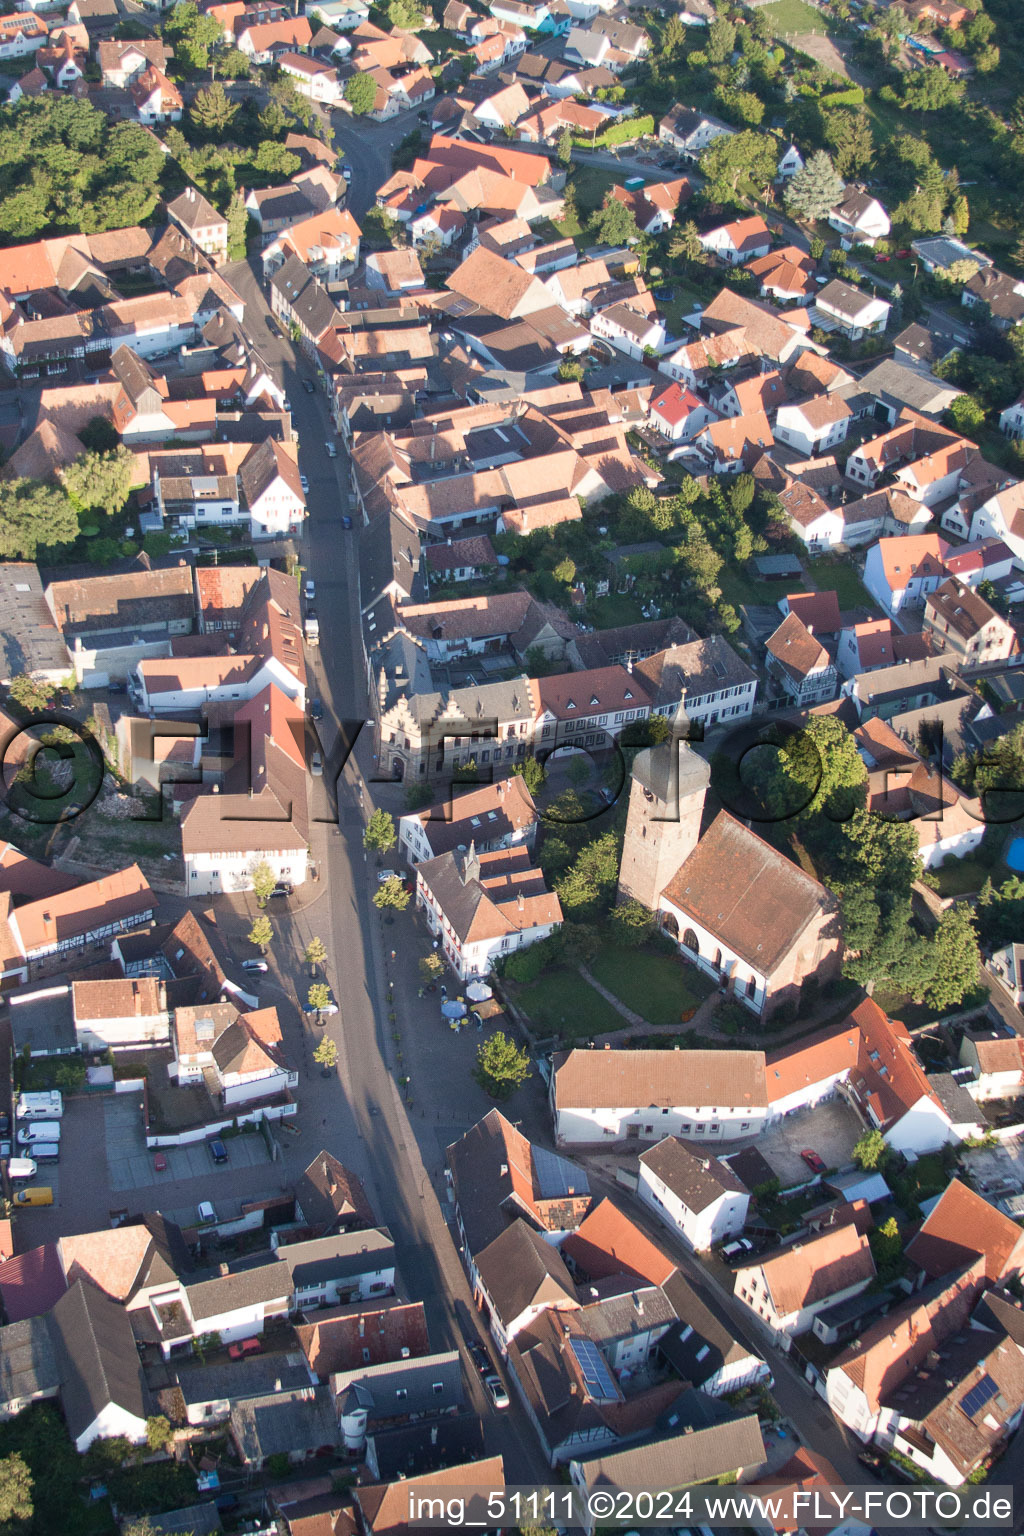 Town View of the streets and houses of the residential areas in the district Billigheim in Billigheim-Ingenheim in the state Rhineland-Palatinate seen from above